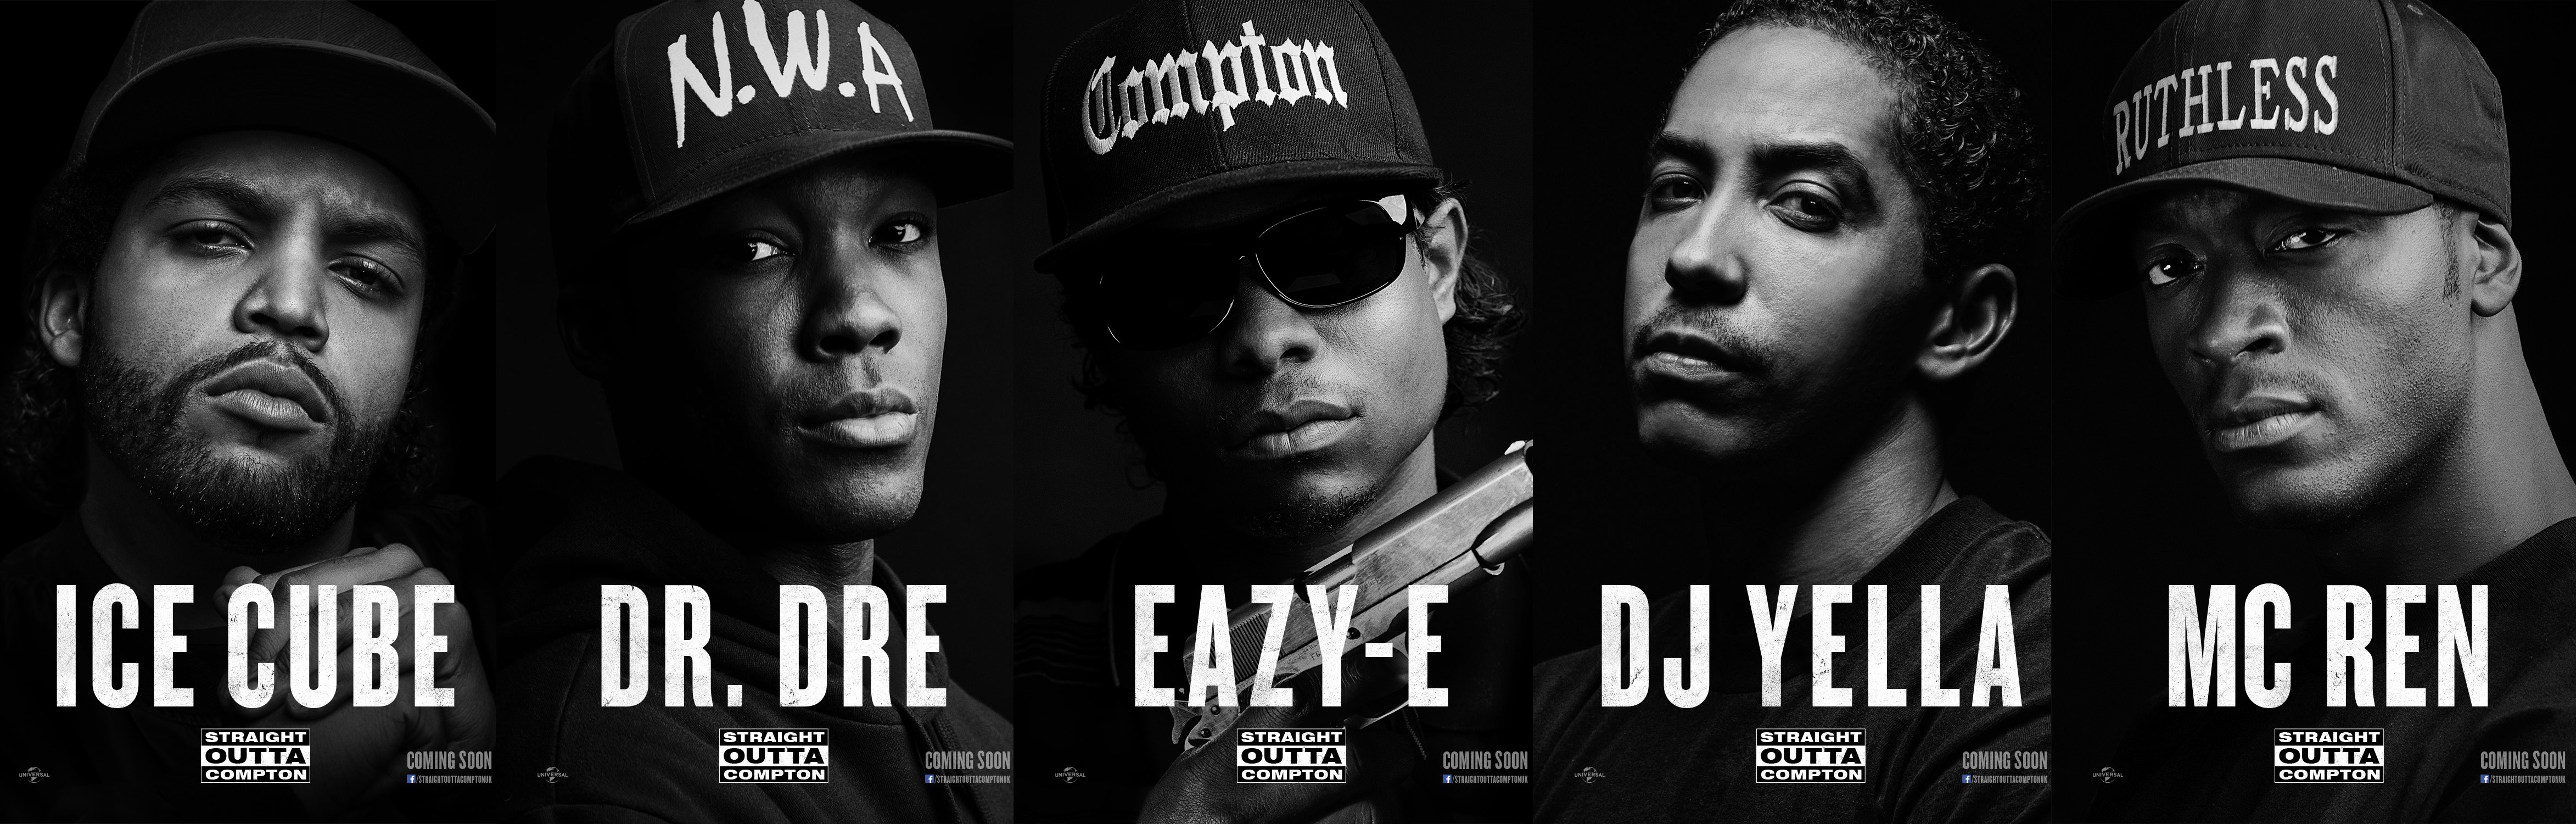 straight-outta-compton-character-posters-banner.jpg